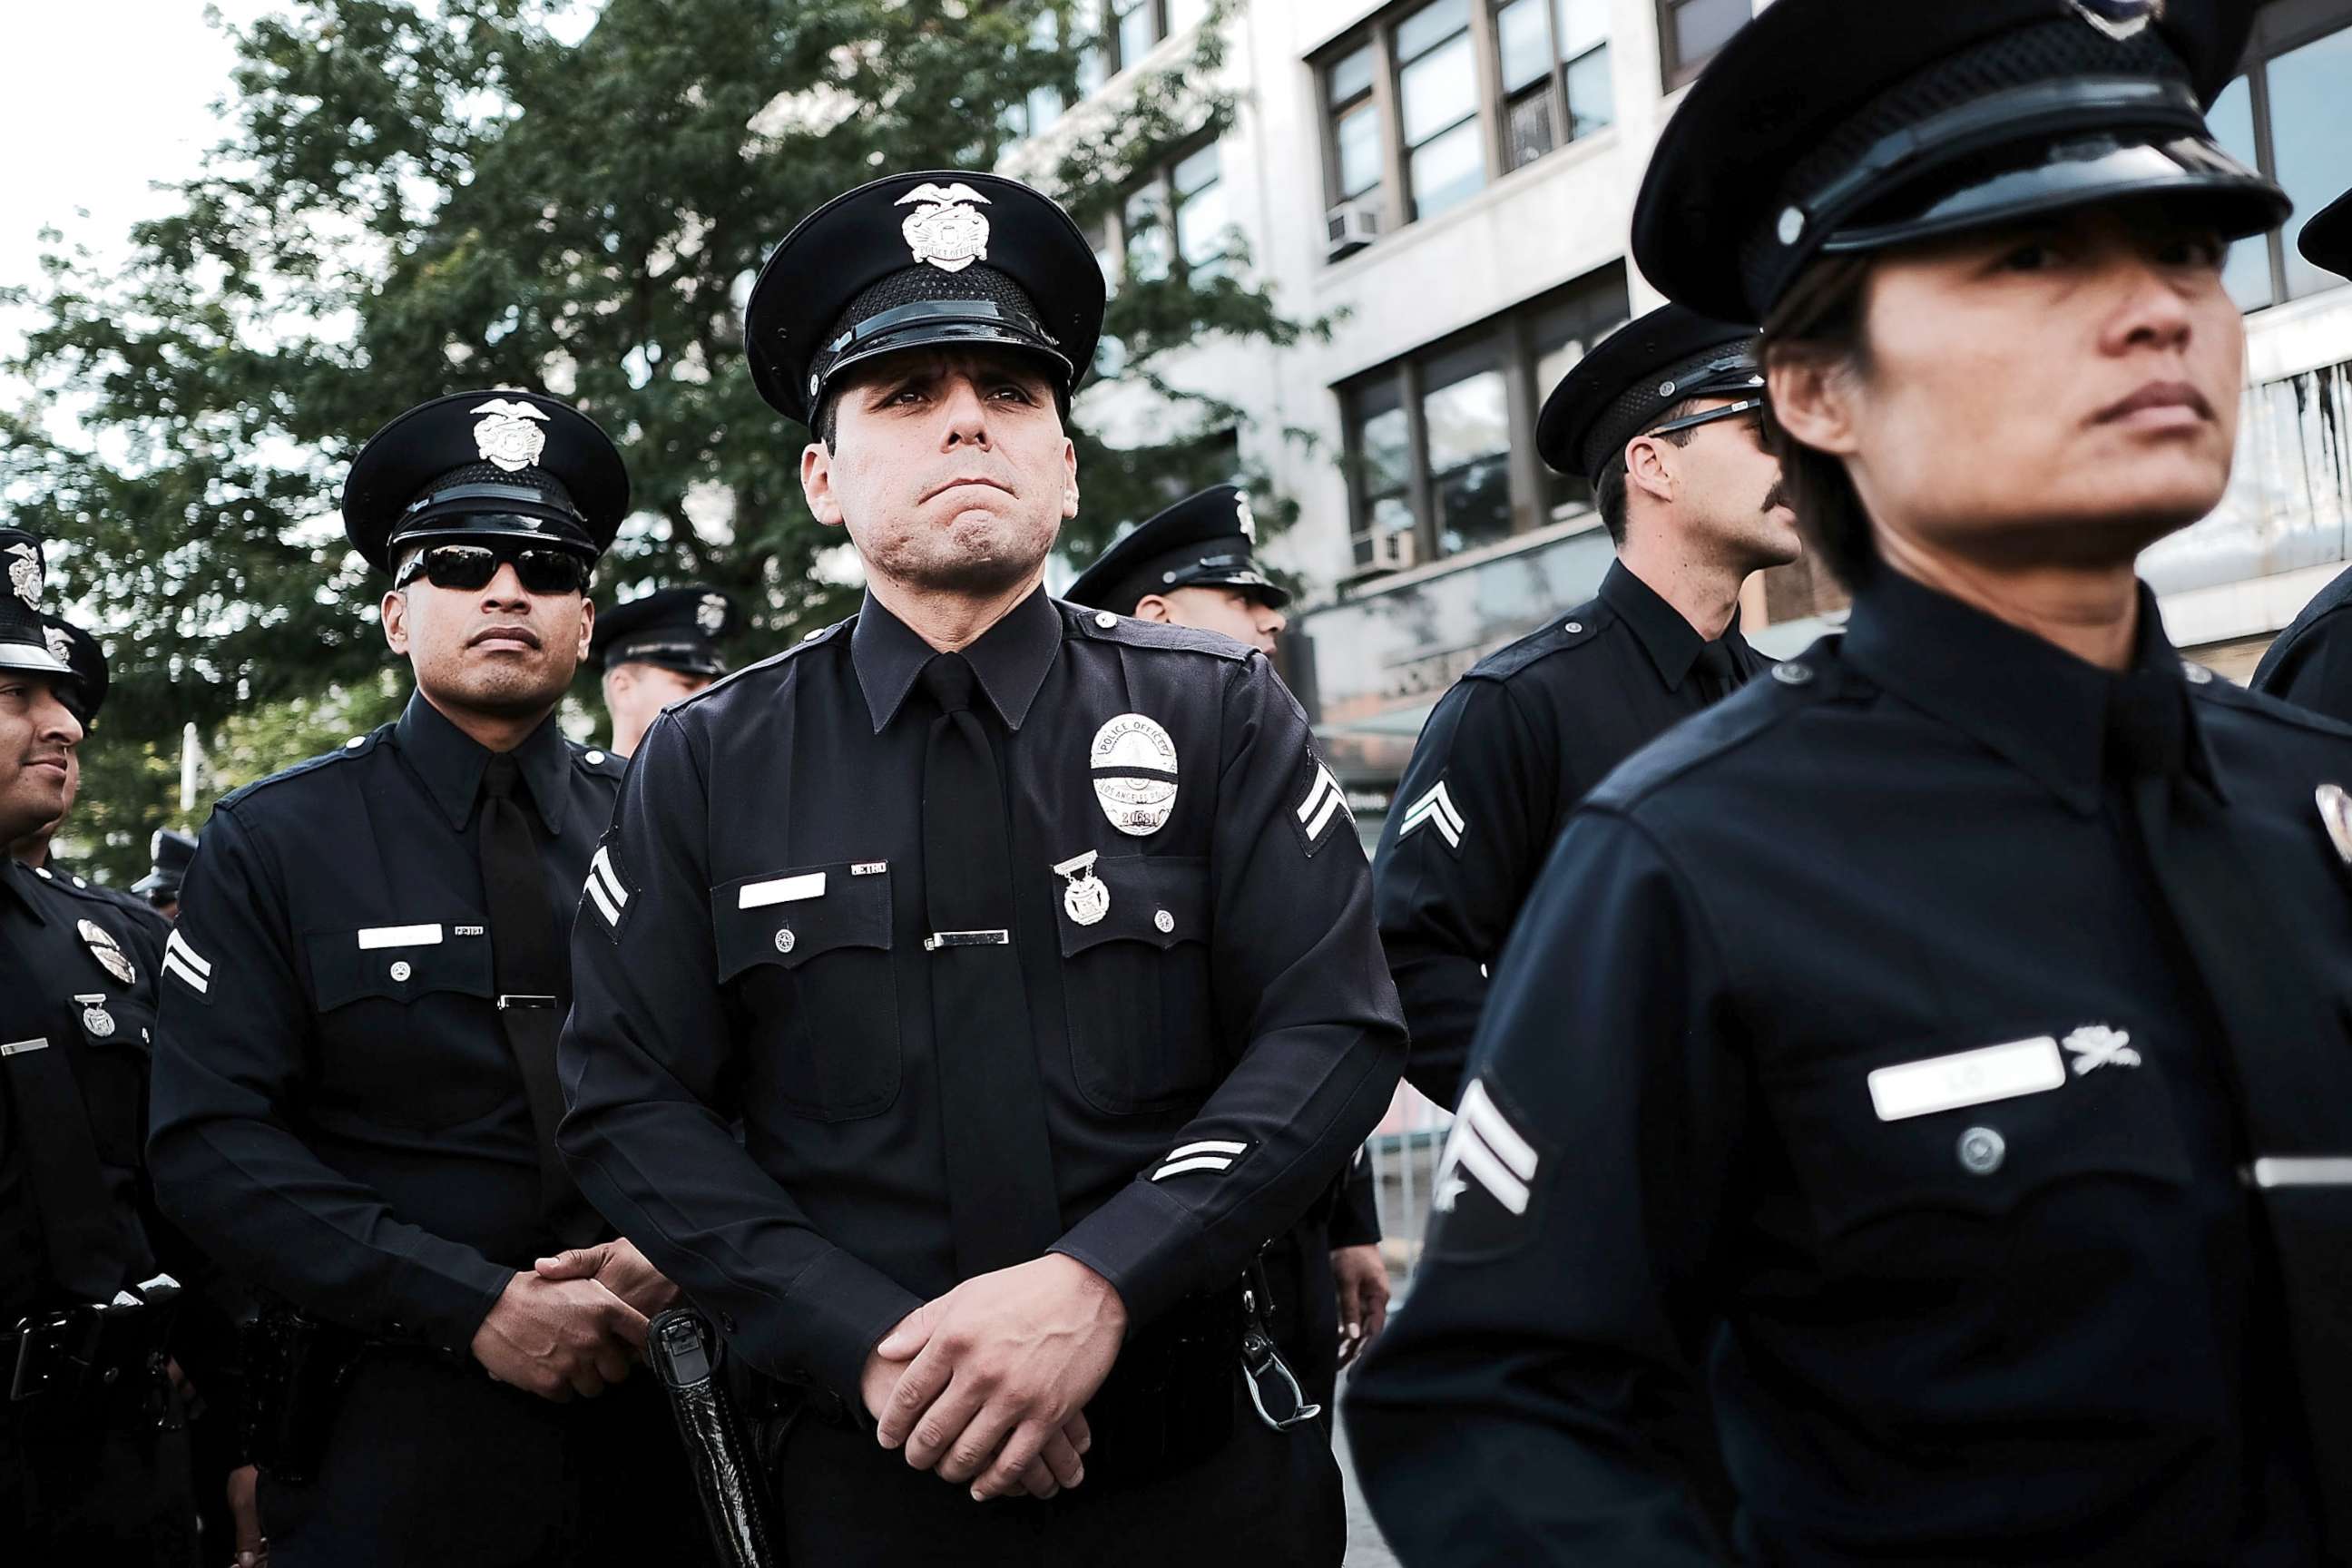 PHOTO: Police from Los Angeles stand outside of a Bronx church during the funeral for NYPD Officer Miosotis Familia, who was shot and killed last week in what police have called "an unprovoked attack" in the Bronx, on July 11, 2017, in New York City.